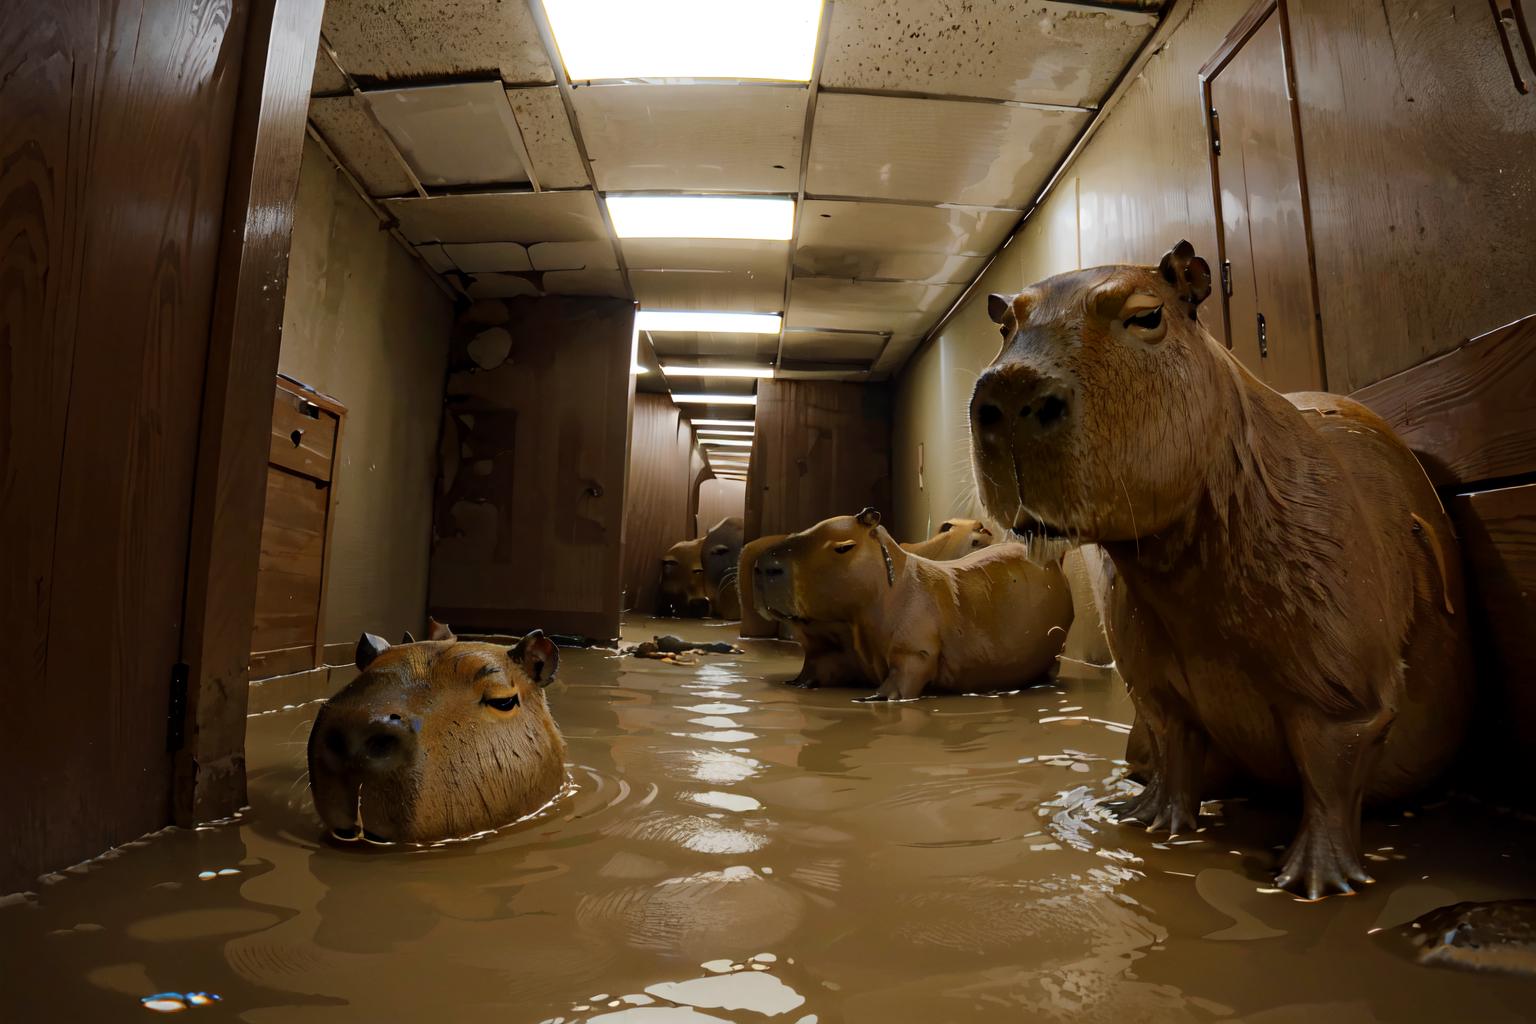 Three Animals, Two of which are Rodents, in a Flooded Room